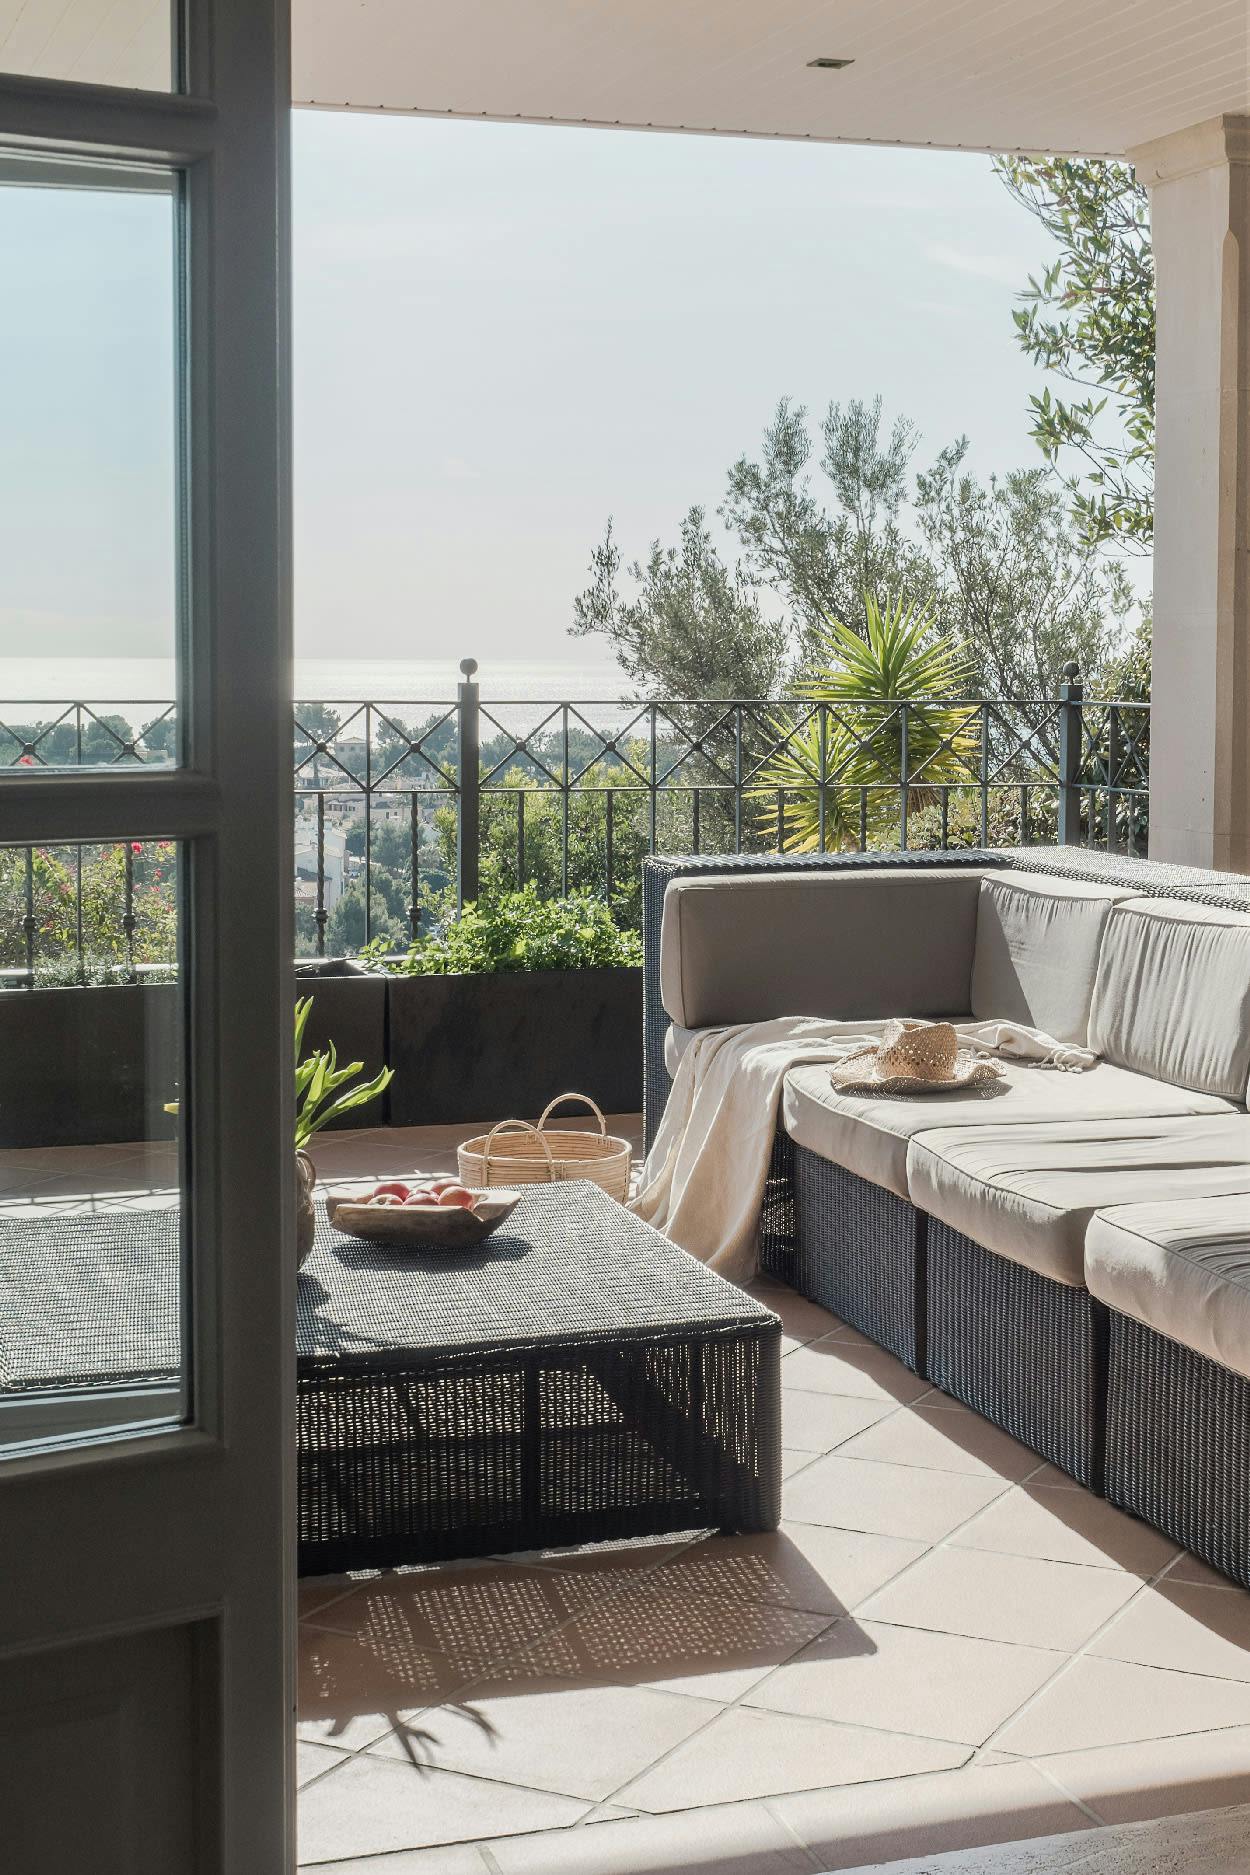 The image showcases a spacious outdoor patio area with a large glass door that opens to a beautiful view of the ocean. The patio is furnished with a couch, a chair, and a table, creating a comfortable and inviting space for relaxation and socializing.

A bowl is placed on the table, adding a touch of elegance to the scene. The patio is surrounded by a brick walkway, which adds to the overall aesthetic of the outdoor area. The presence of a potted plant near the couch further enhances the ambiance of the space.